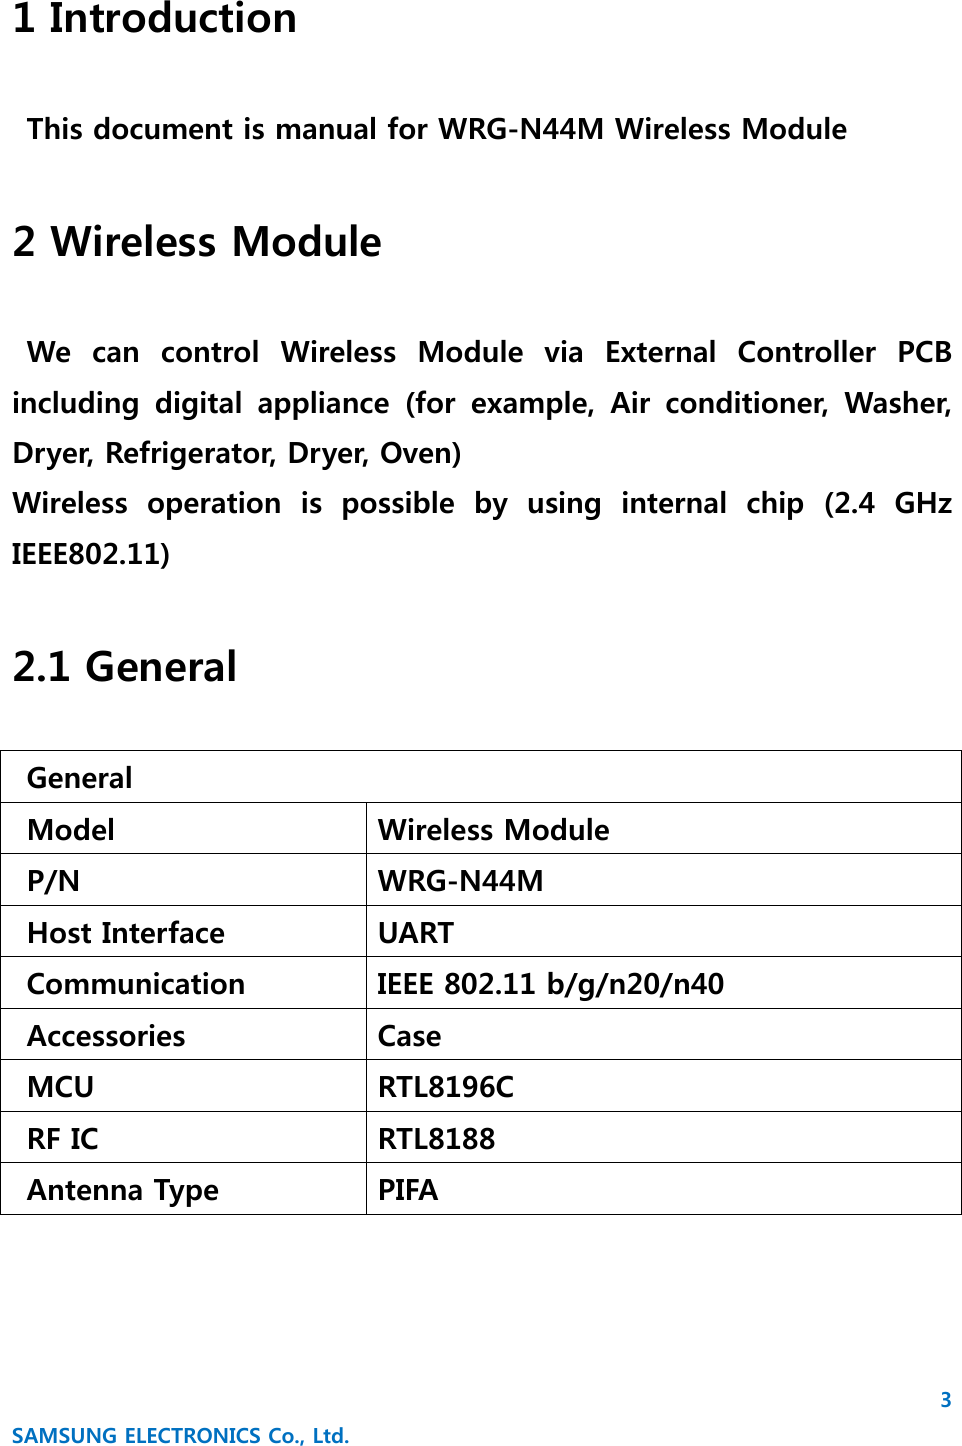 3 SAMSUNG ELECTRONICS Co., Ltd. 1 Introduction  This document is manual for WRG-N44M Wireless Module  2 Wireless Module  We  can  control  Wireless  Module  via  External  Controller  PCB including  digital  appliance  (for  example,  Air  conditioner,  Washer, Dryer, Refrigerator, Dryer, Oven) Wireless  operation  is  possible  by  using  internal  chip  (2.4  GHz IEEE802.11)  2.1 General  General Model  Wireless Module   P/N  WRG-N44M   Host Interface  UART   Communication  IEEE 802.11 b/g/n20/n40   Accessories  Case   MCU  RTL8196C   RF IC  RTL8188   Antenna Type  PIFA   